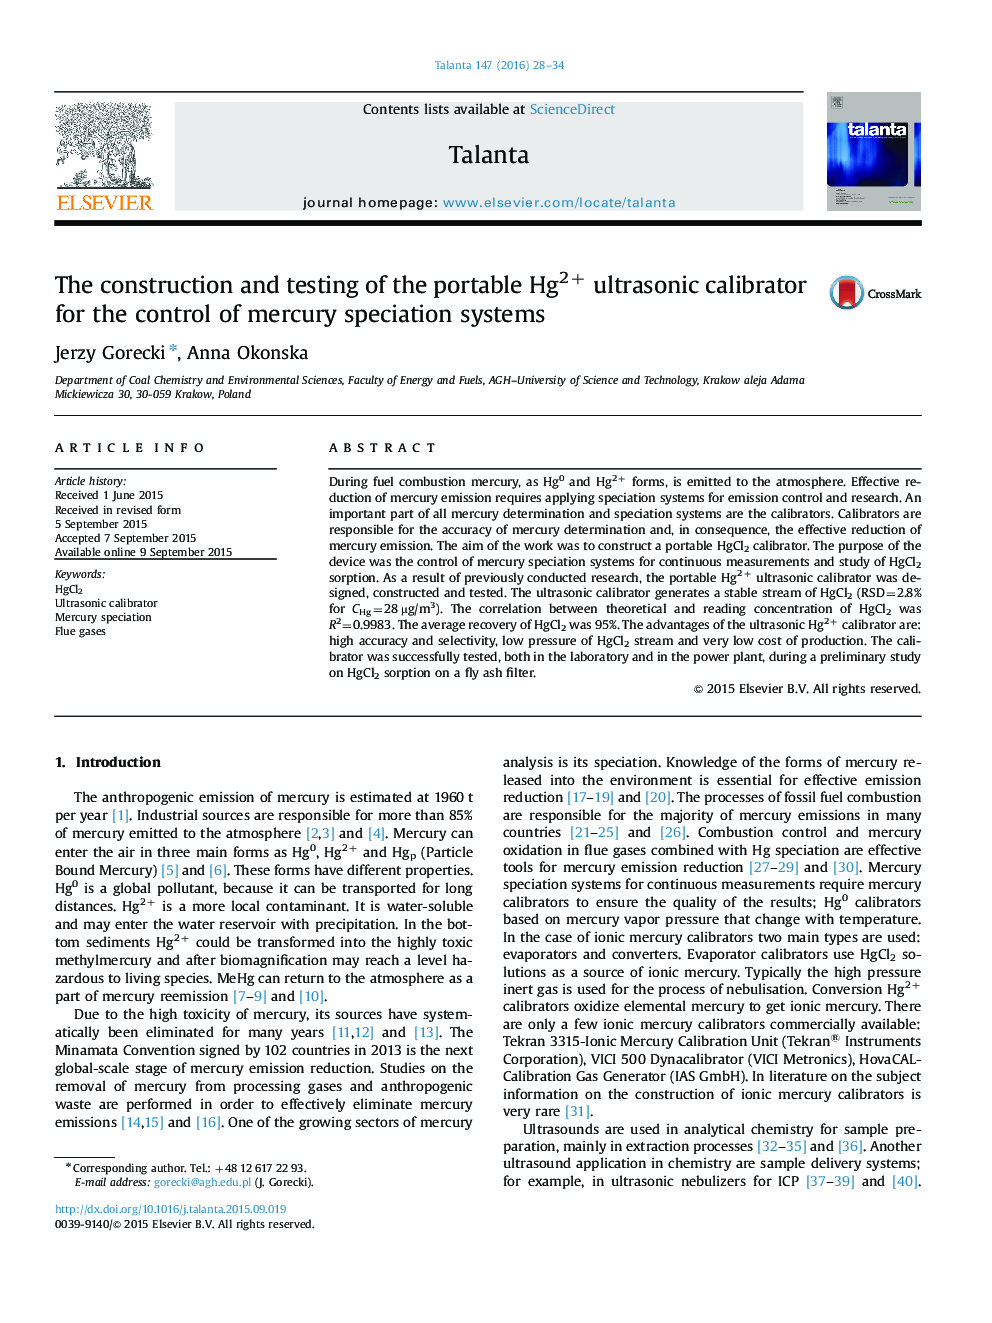 The construction and testing of the portable Hg2+ ultrasonic calibrator for the control of mercury speciation systems